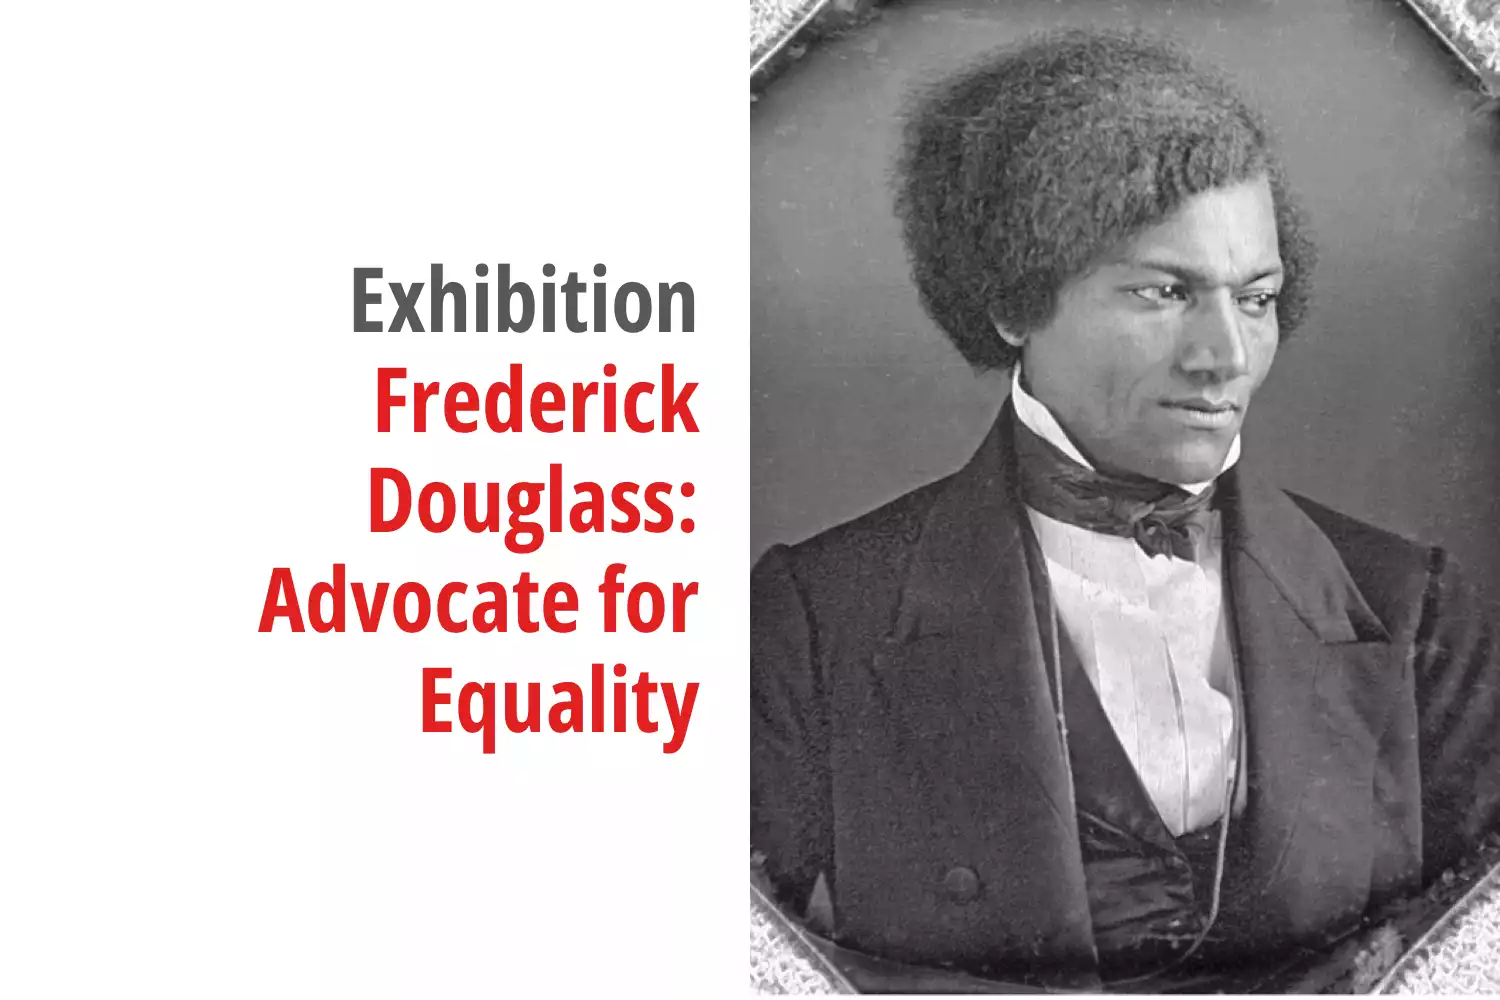 Graphic for the exhibition titled Frederick Douglass: Advocate for Equality